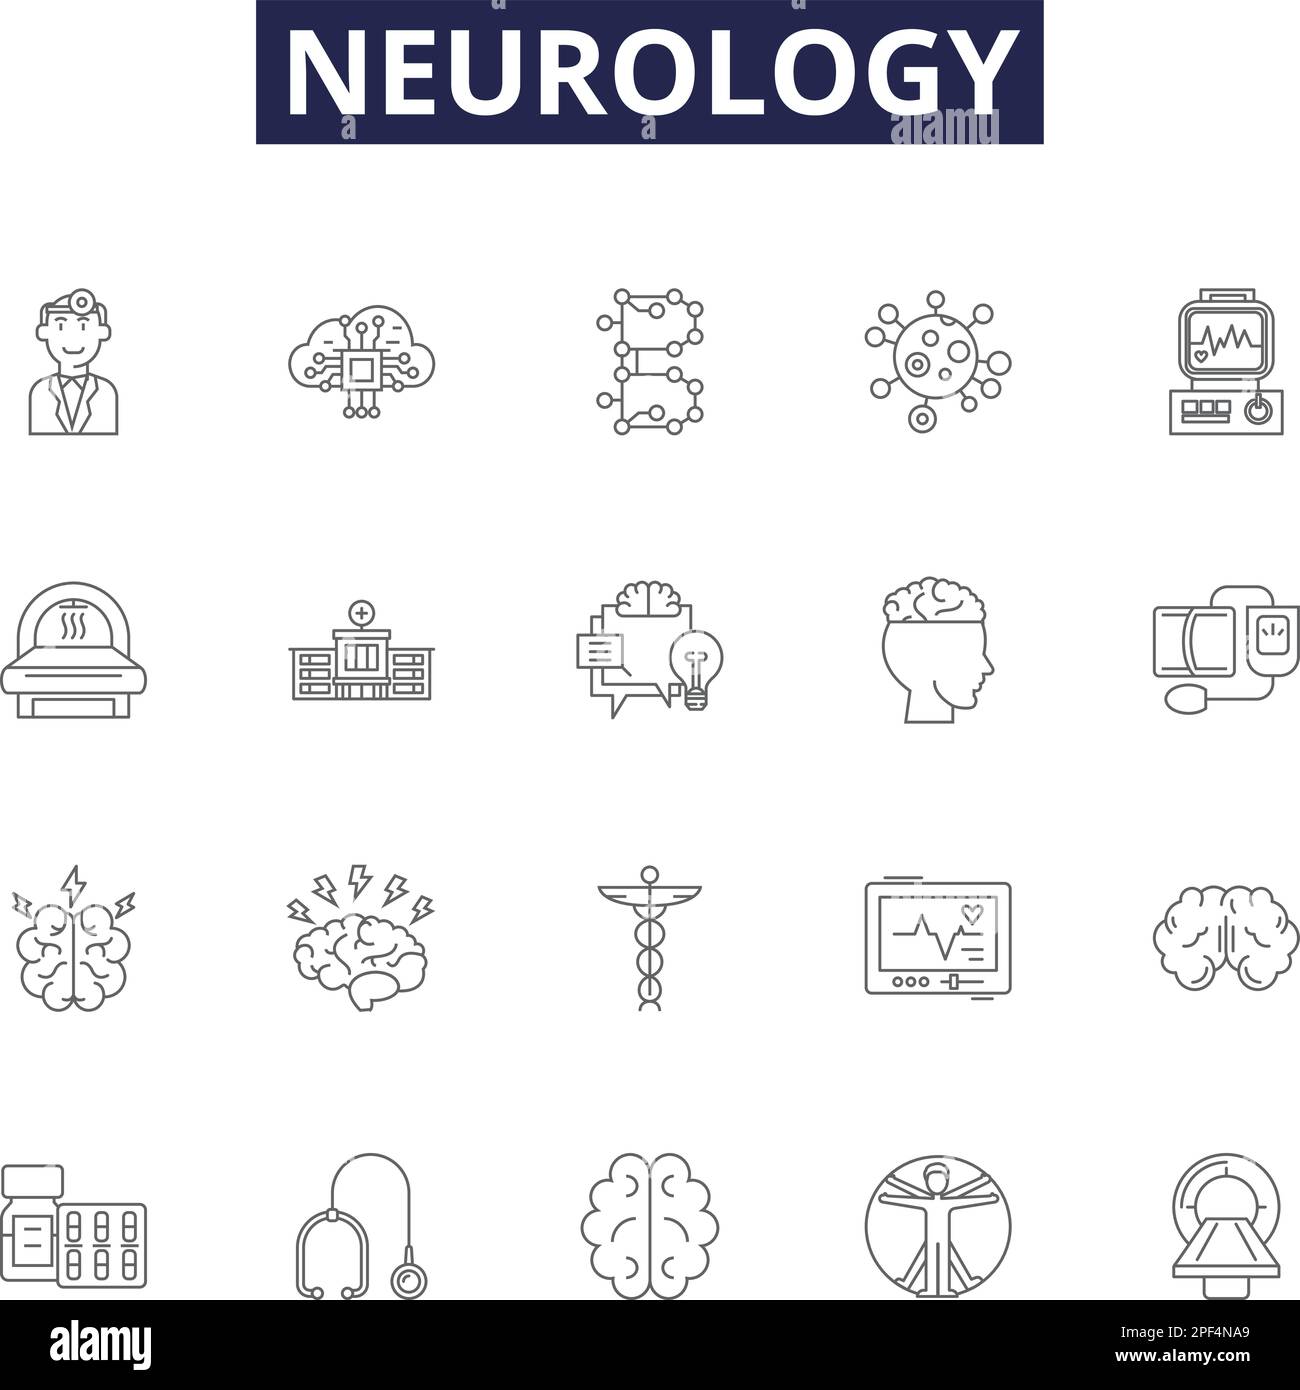 Neurology line vector icons and signs. Synapses, Neurotransmitters, Brain, Spine, Nerves, Tremors, Strokes, Epilepsy outline vector illustration set Stock Vector